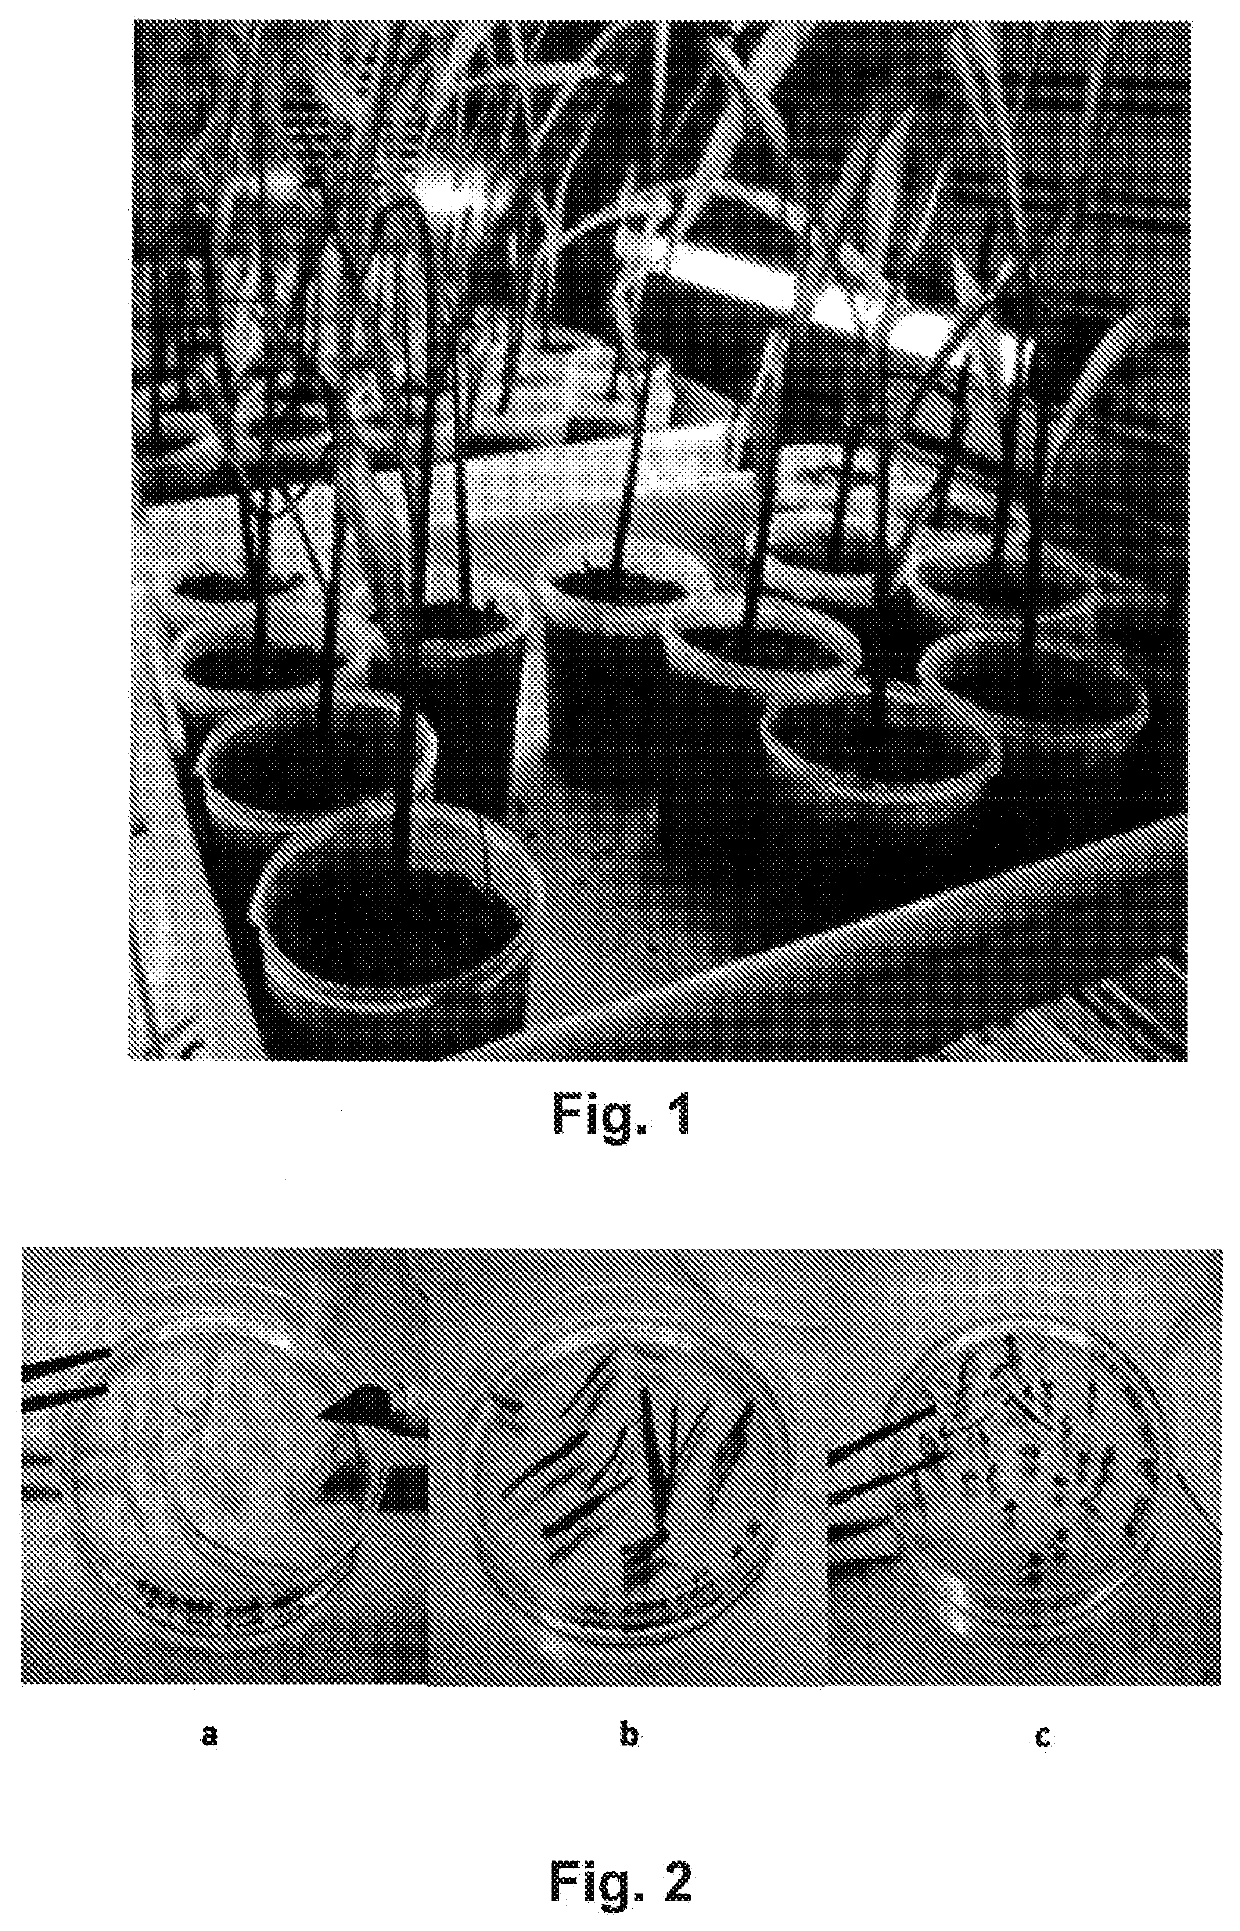 Methylobacterium sp. nov. strain, compositions comprising it, and its use as biostimulant and endophyte nitrogen-fixing bacterium